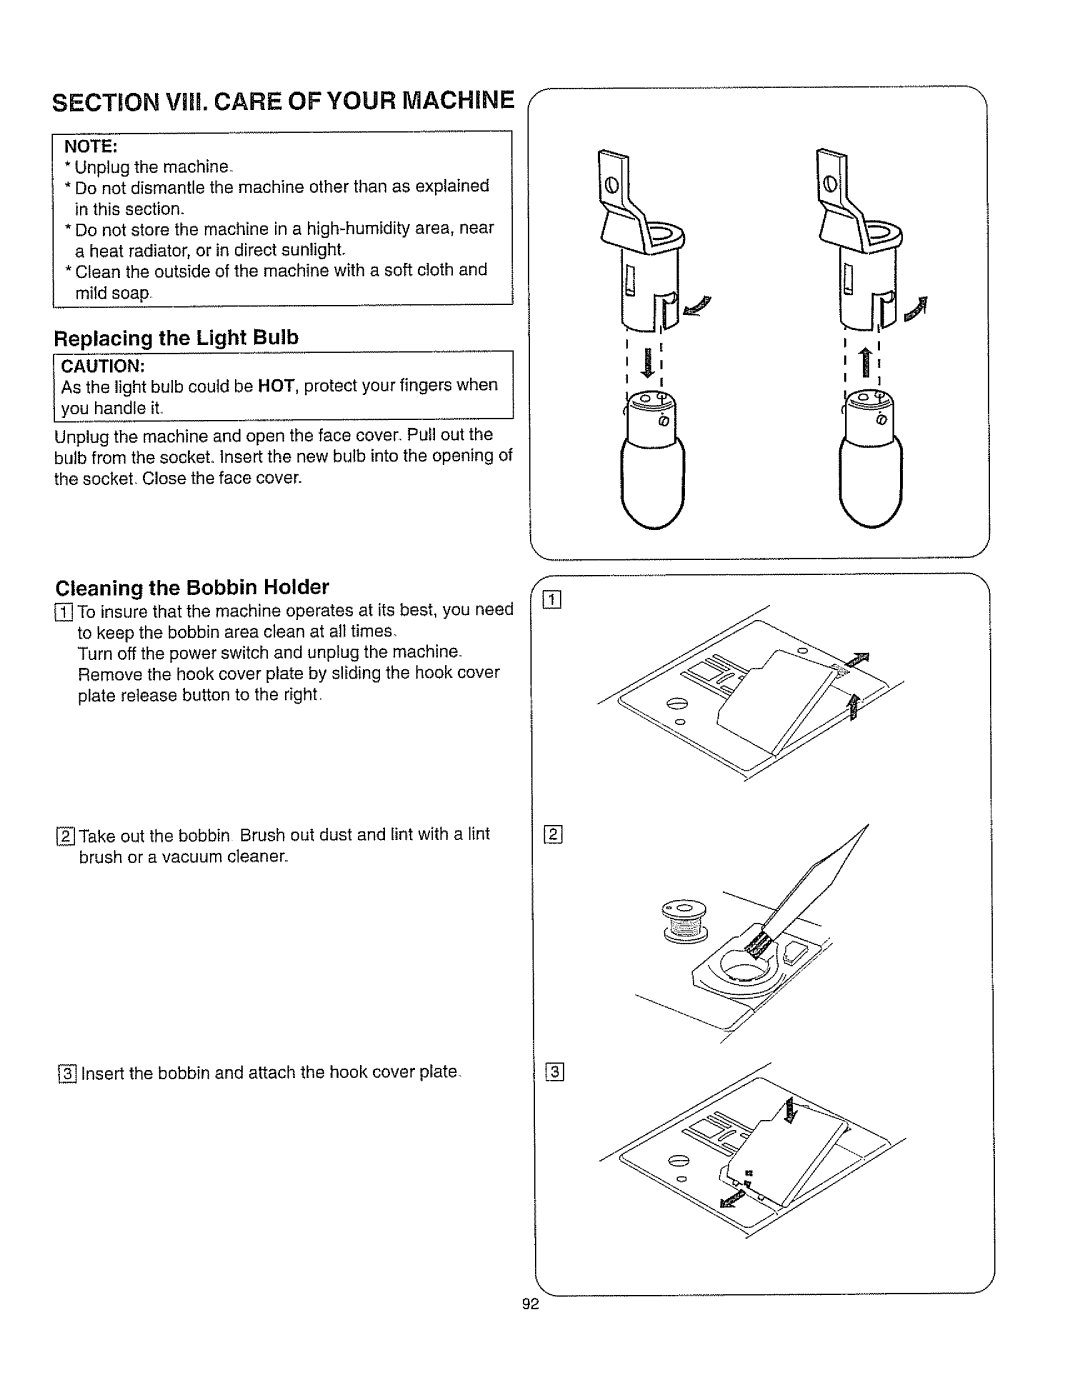 Kenmore 385.162213 owner manual SECTION Viii. CARE OF YOUR MACHINE, Replacing, the Light Bulb, Cleaning the Bobbin Holder 